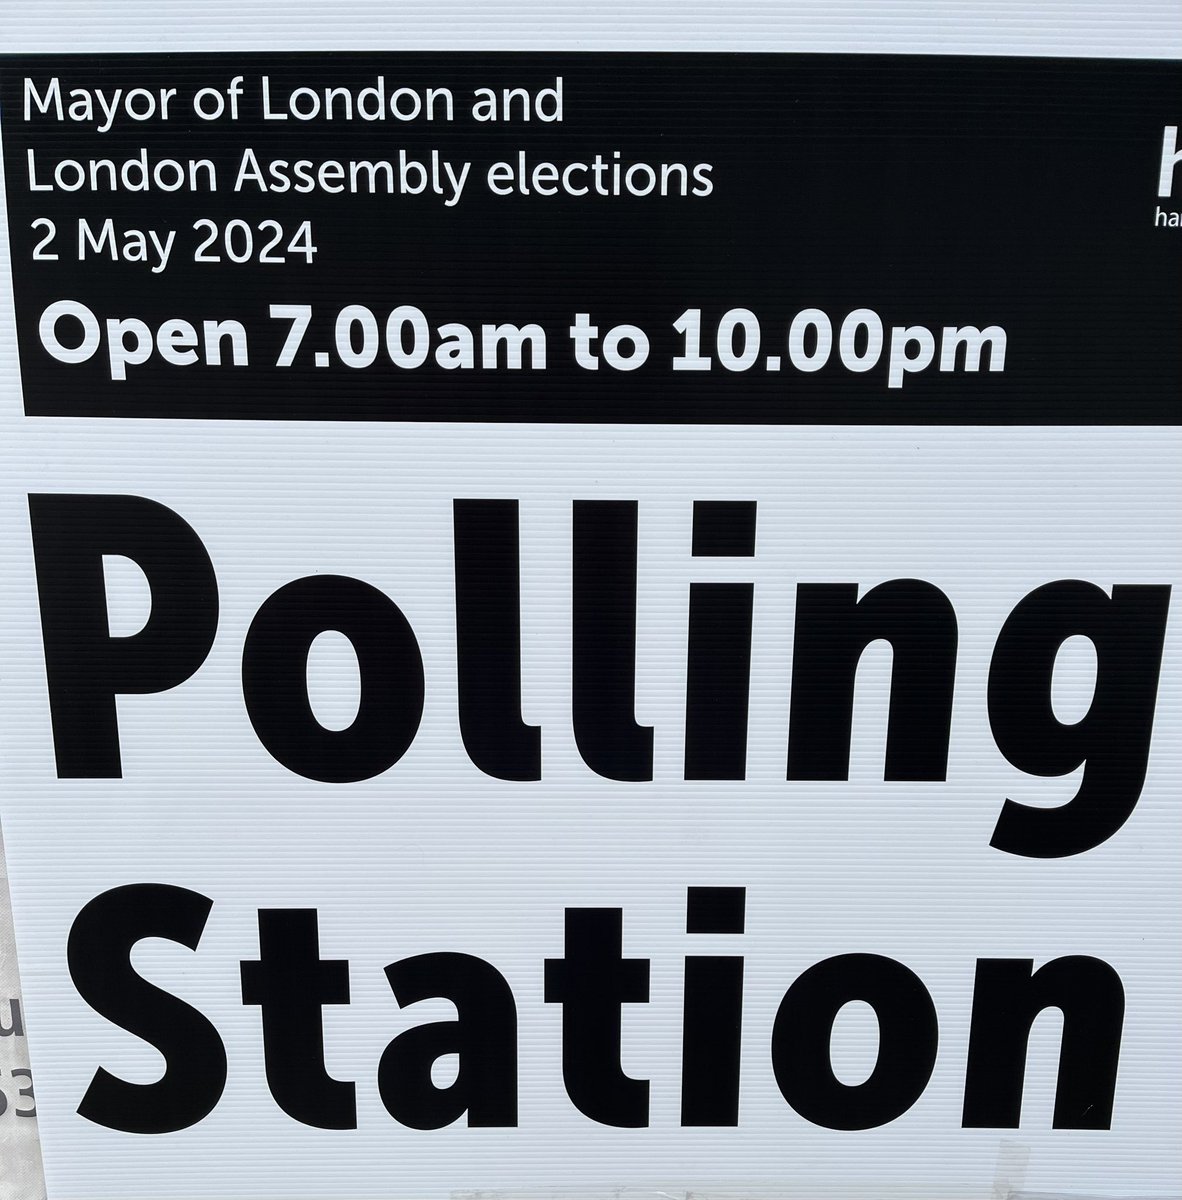 My first London vote ever. No queue No closed box No school closures. Everything smooth and easy. Honoured of having had this chance #PollingDay #LondonElections